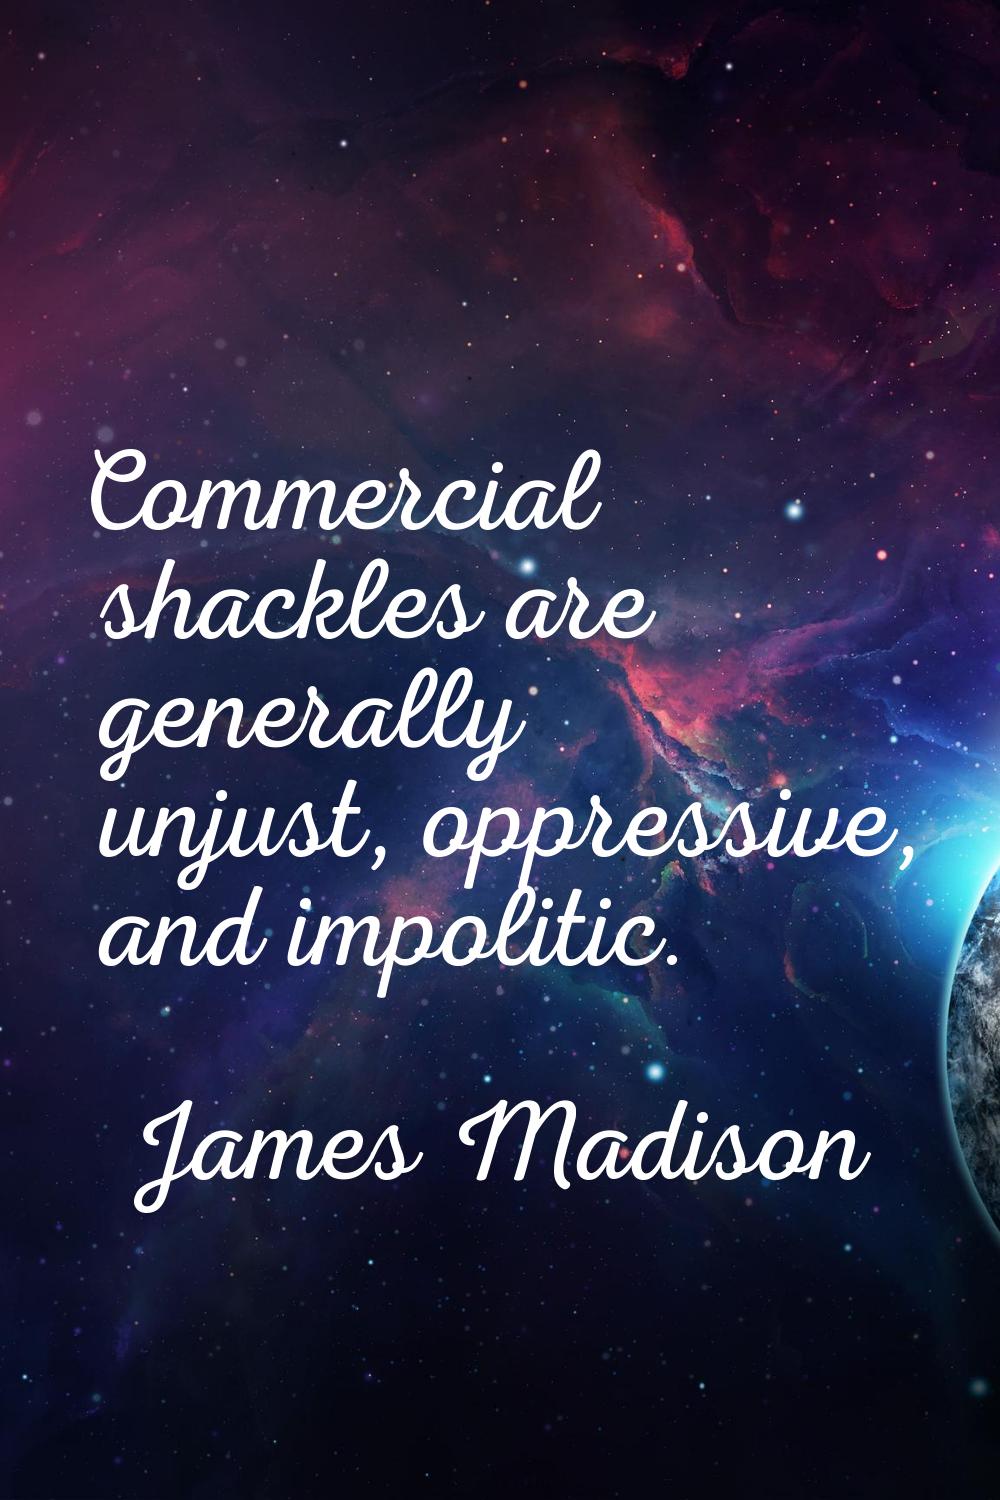 Commercial shackles are generally unjust, oppressive, and impolitic.